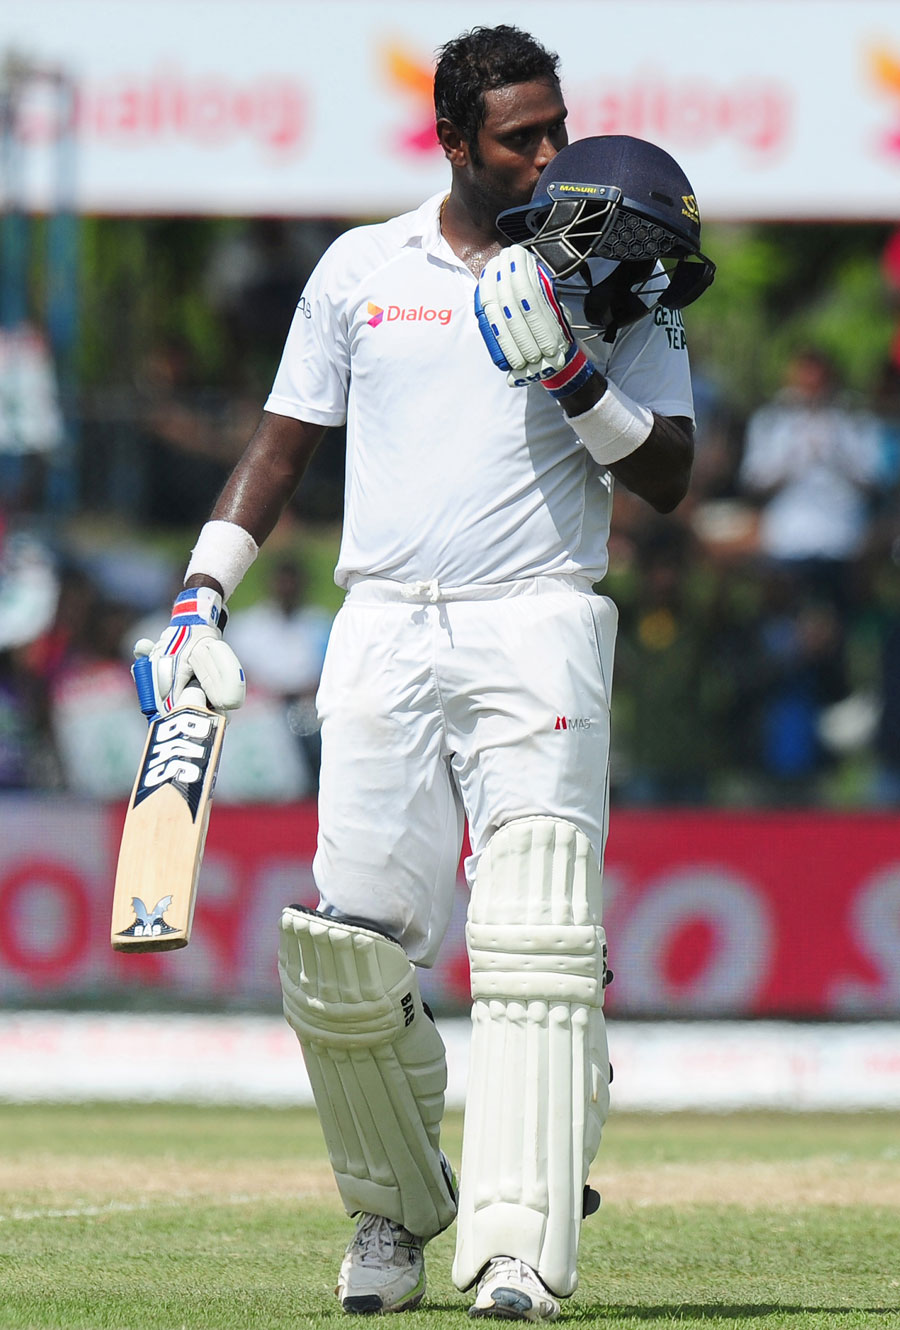 Angelo Mathews celebrates his sixth Test century on the 3rd day of the 2nd Test between Sri Lanka and India in Colombo on Saturday.